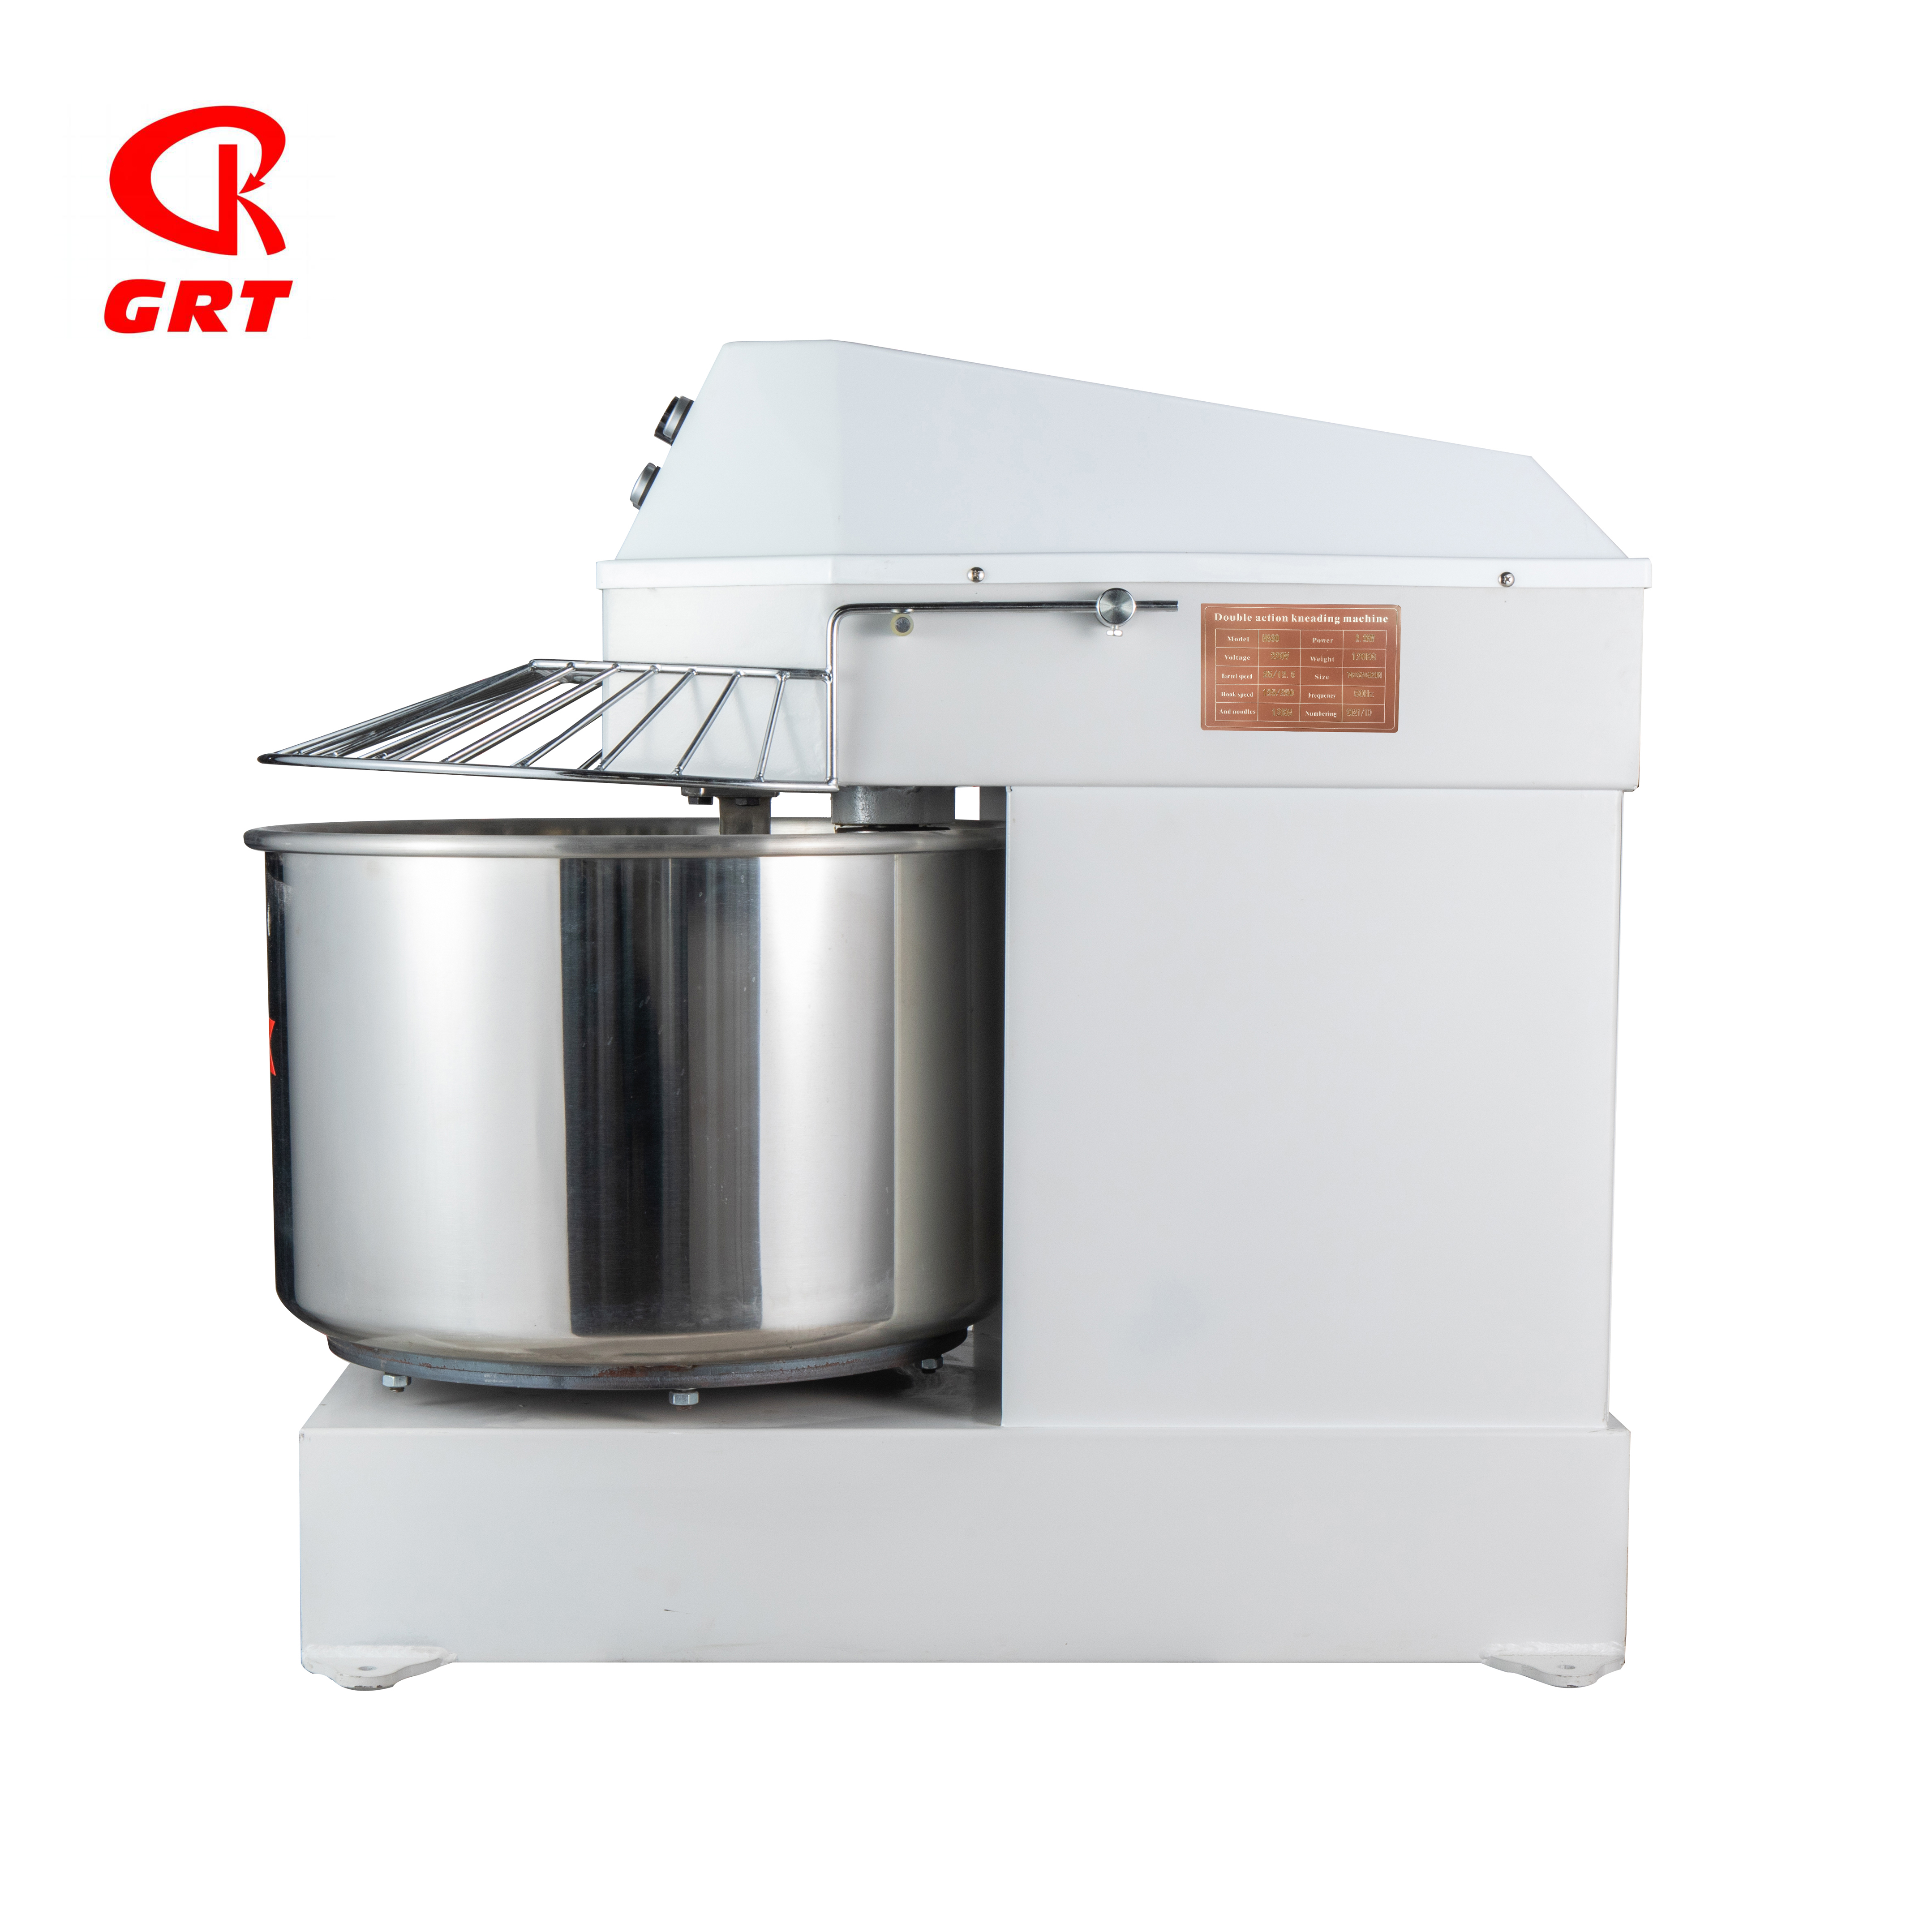 GRT-HS100 Industrial Bakery Mixing Machine Double Speed 100L Dough Mixer for bakery